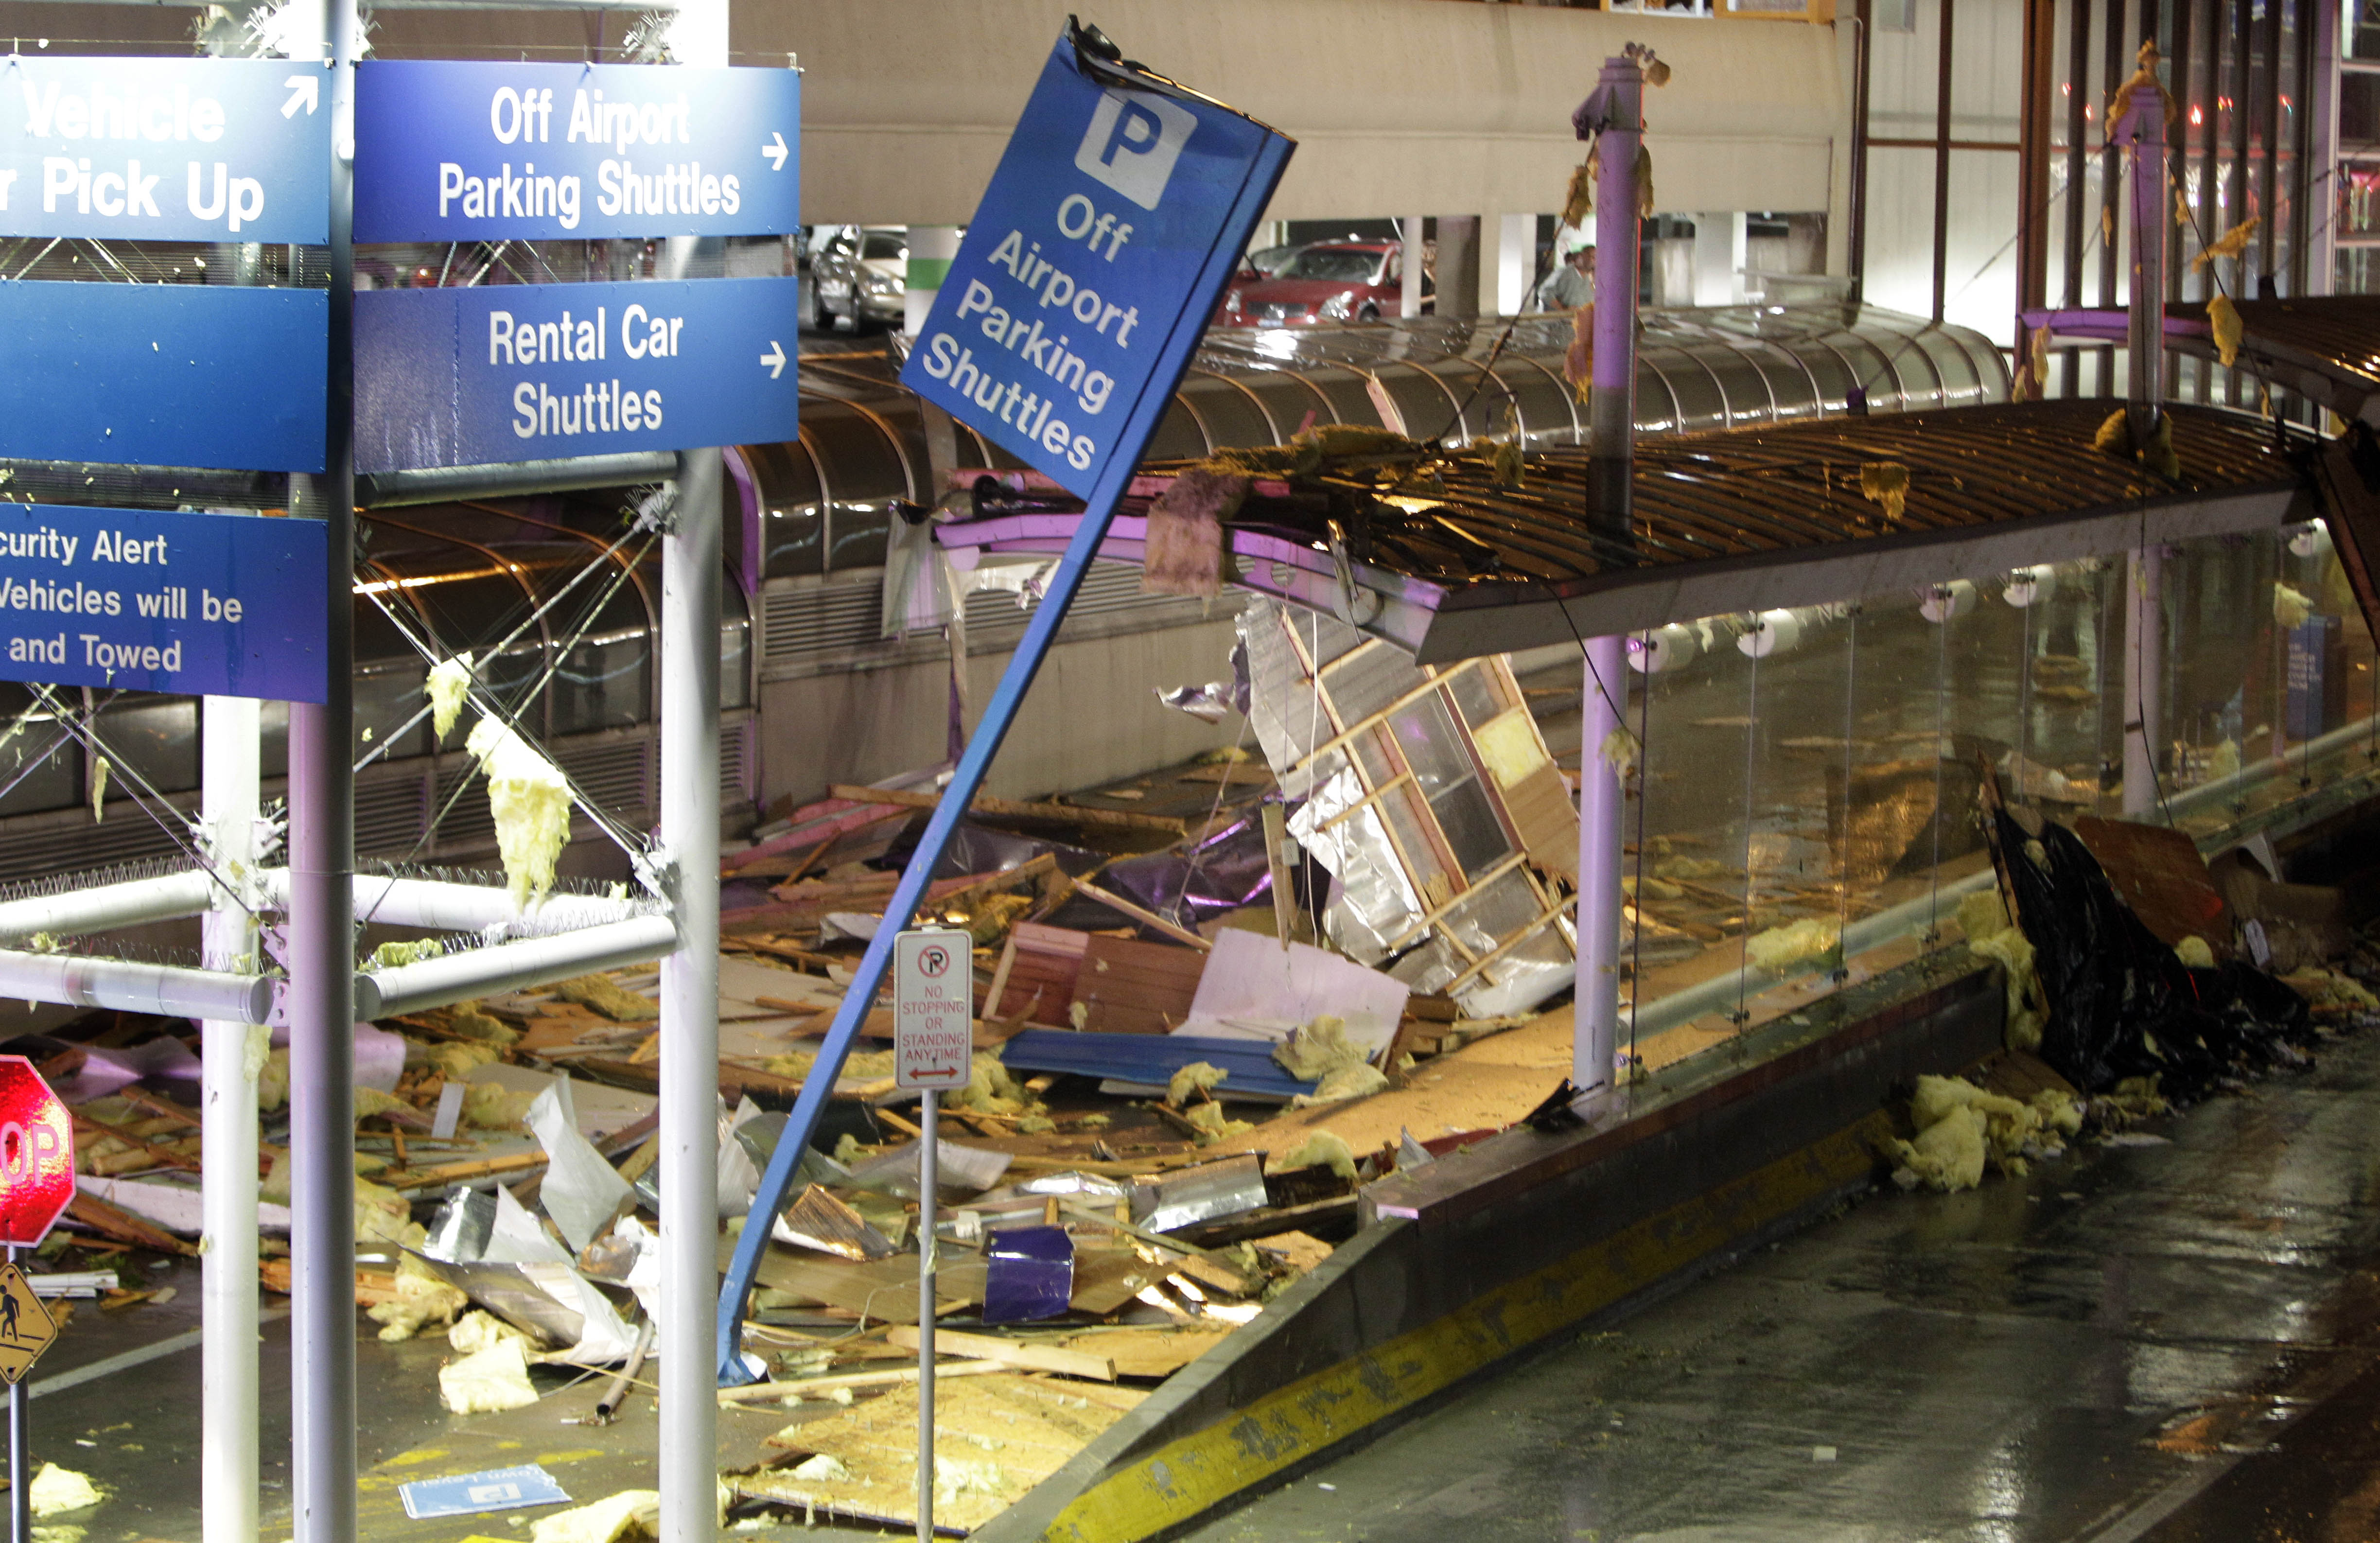 Lambert Airport in St. Louis closed, crews clean up after tornado leaves damage and injuries ...